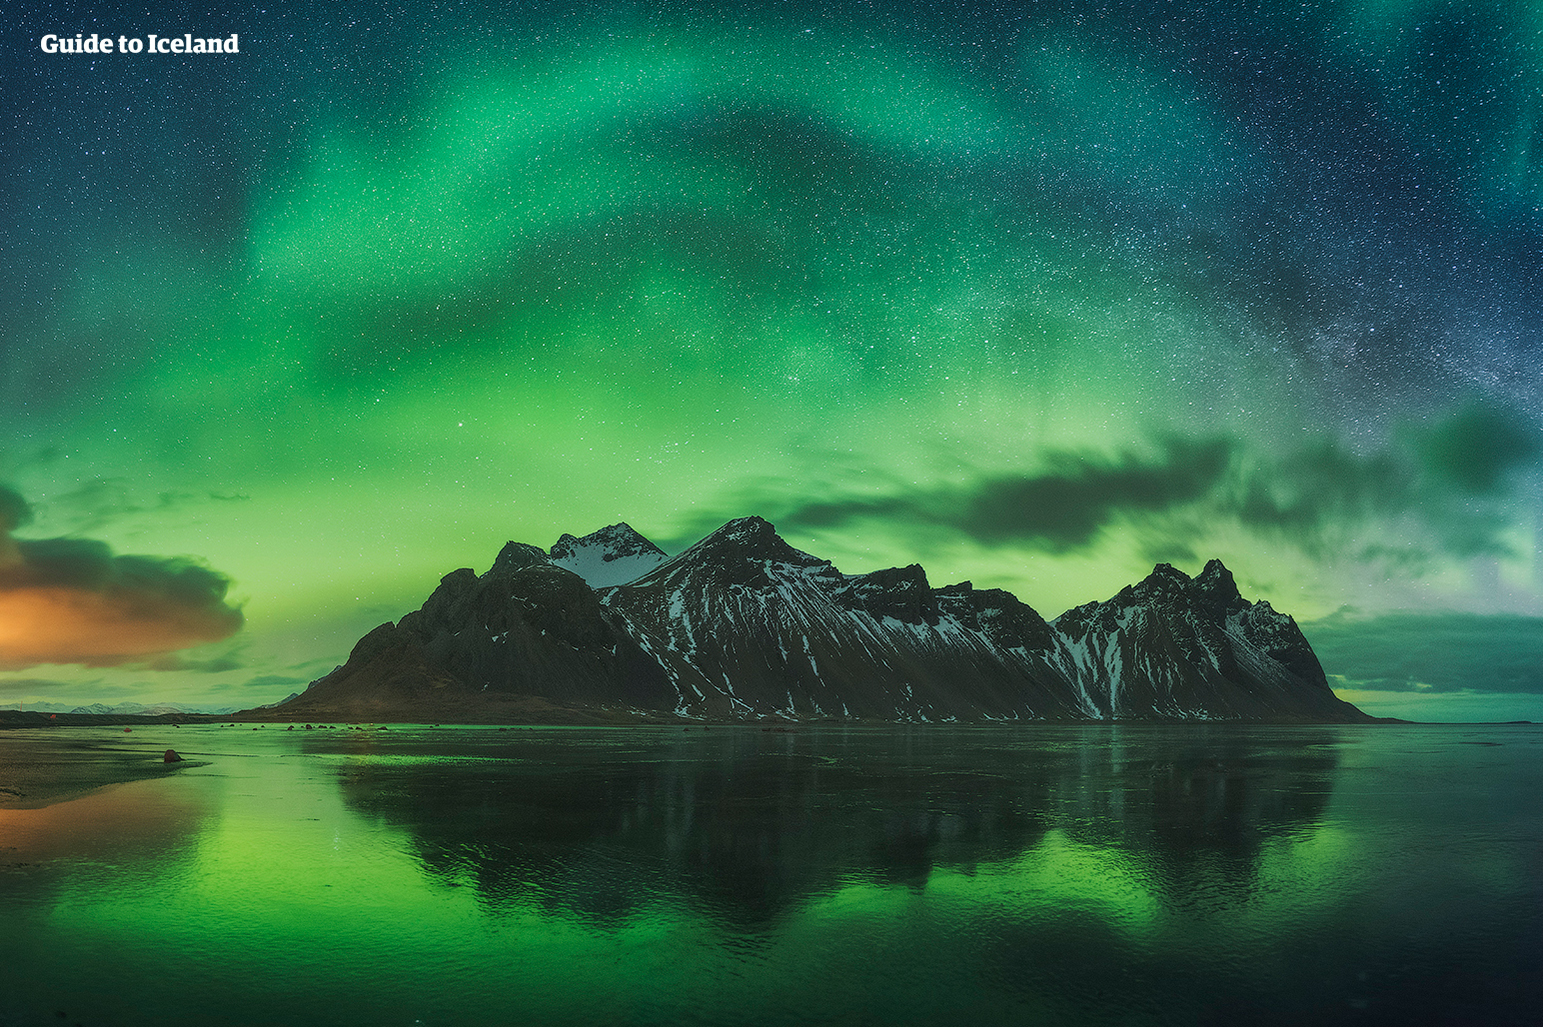 Vestrahorn is a spectacular mountain, especially under the Northern Lights.